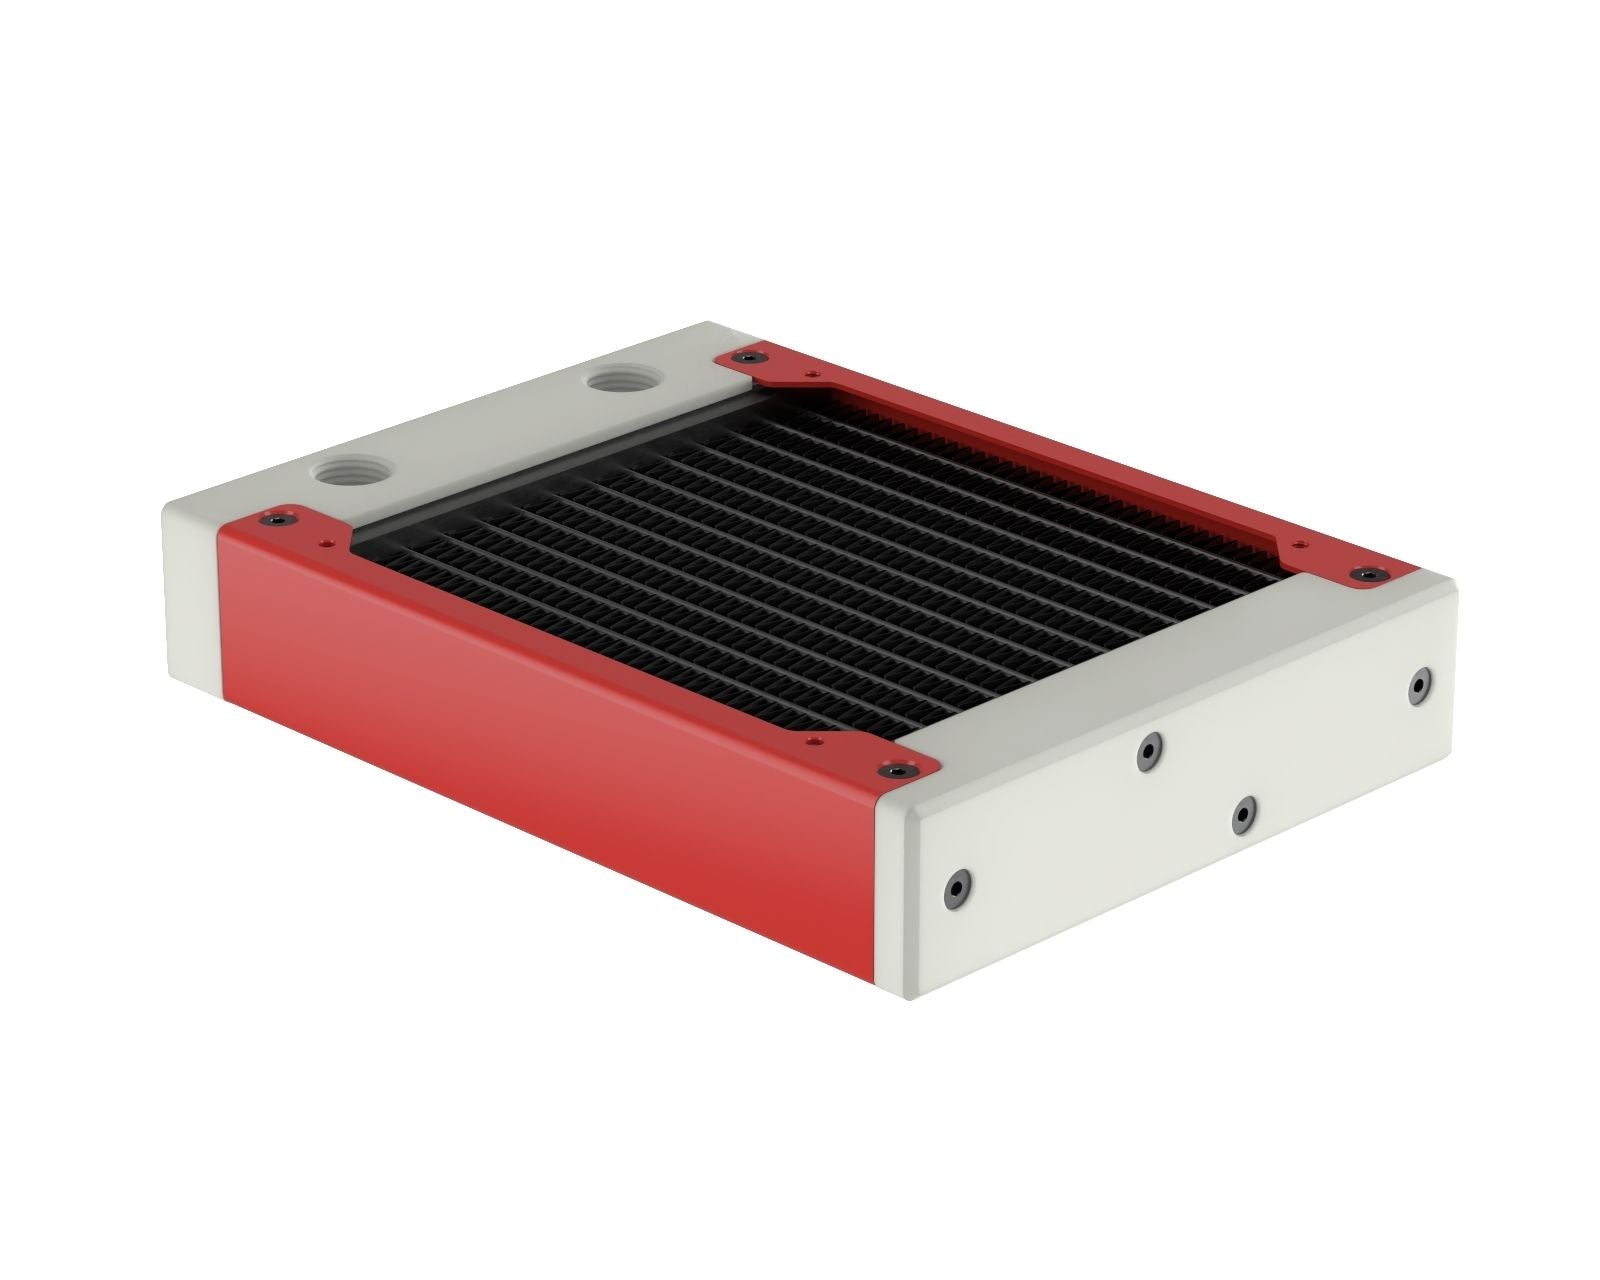 PrimoChill 120SL (30mm) EXIMO Modular Radiator, White POM, 1x120mm, Single Fan (R-SL-W12) Available in 20+ Colors, Assembled in USA and Custom Watercooling Loop Ready - Razor Red